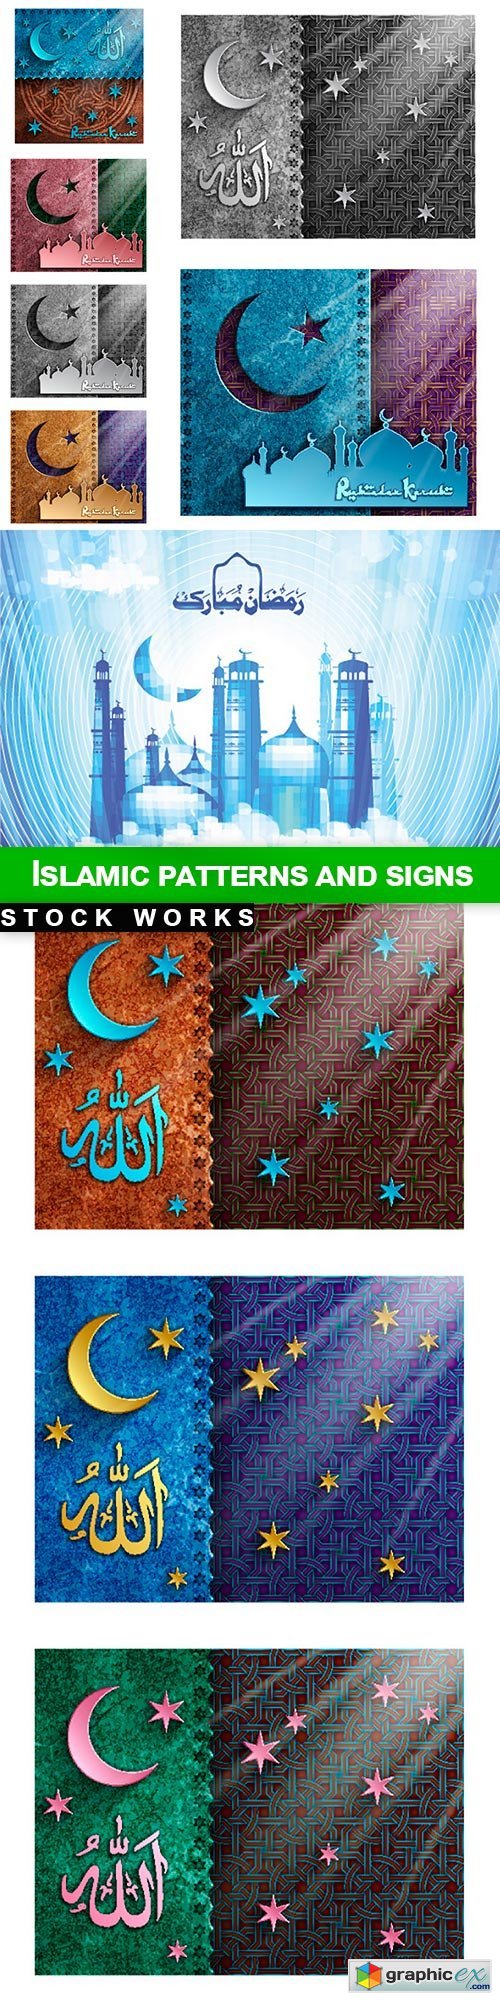 Islamic patterns and signs - 10 EPS